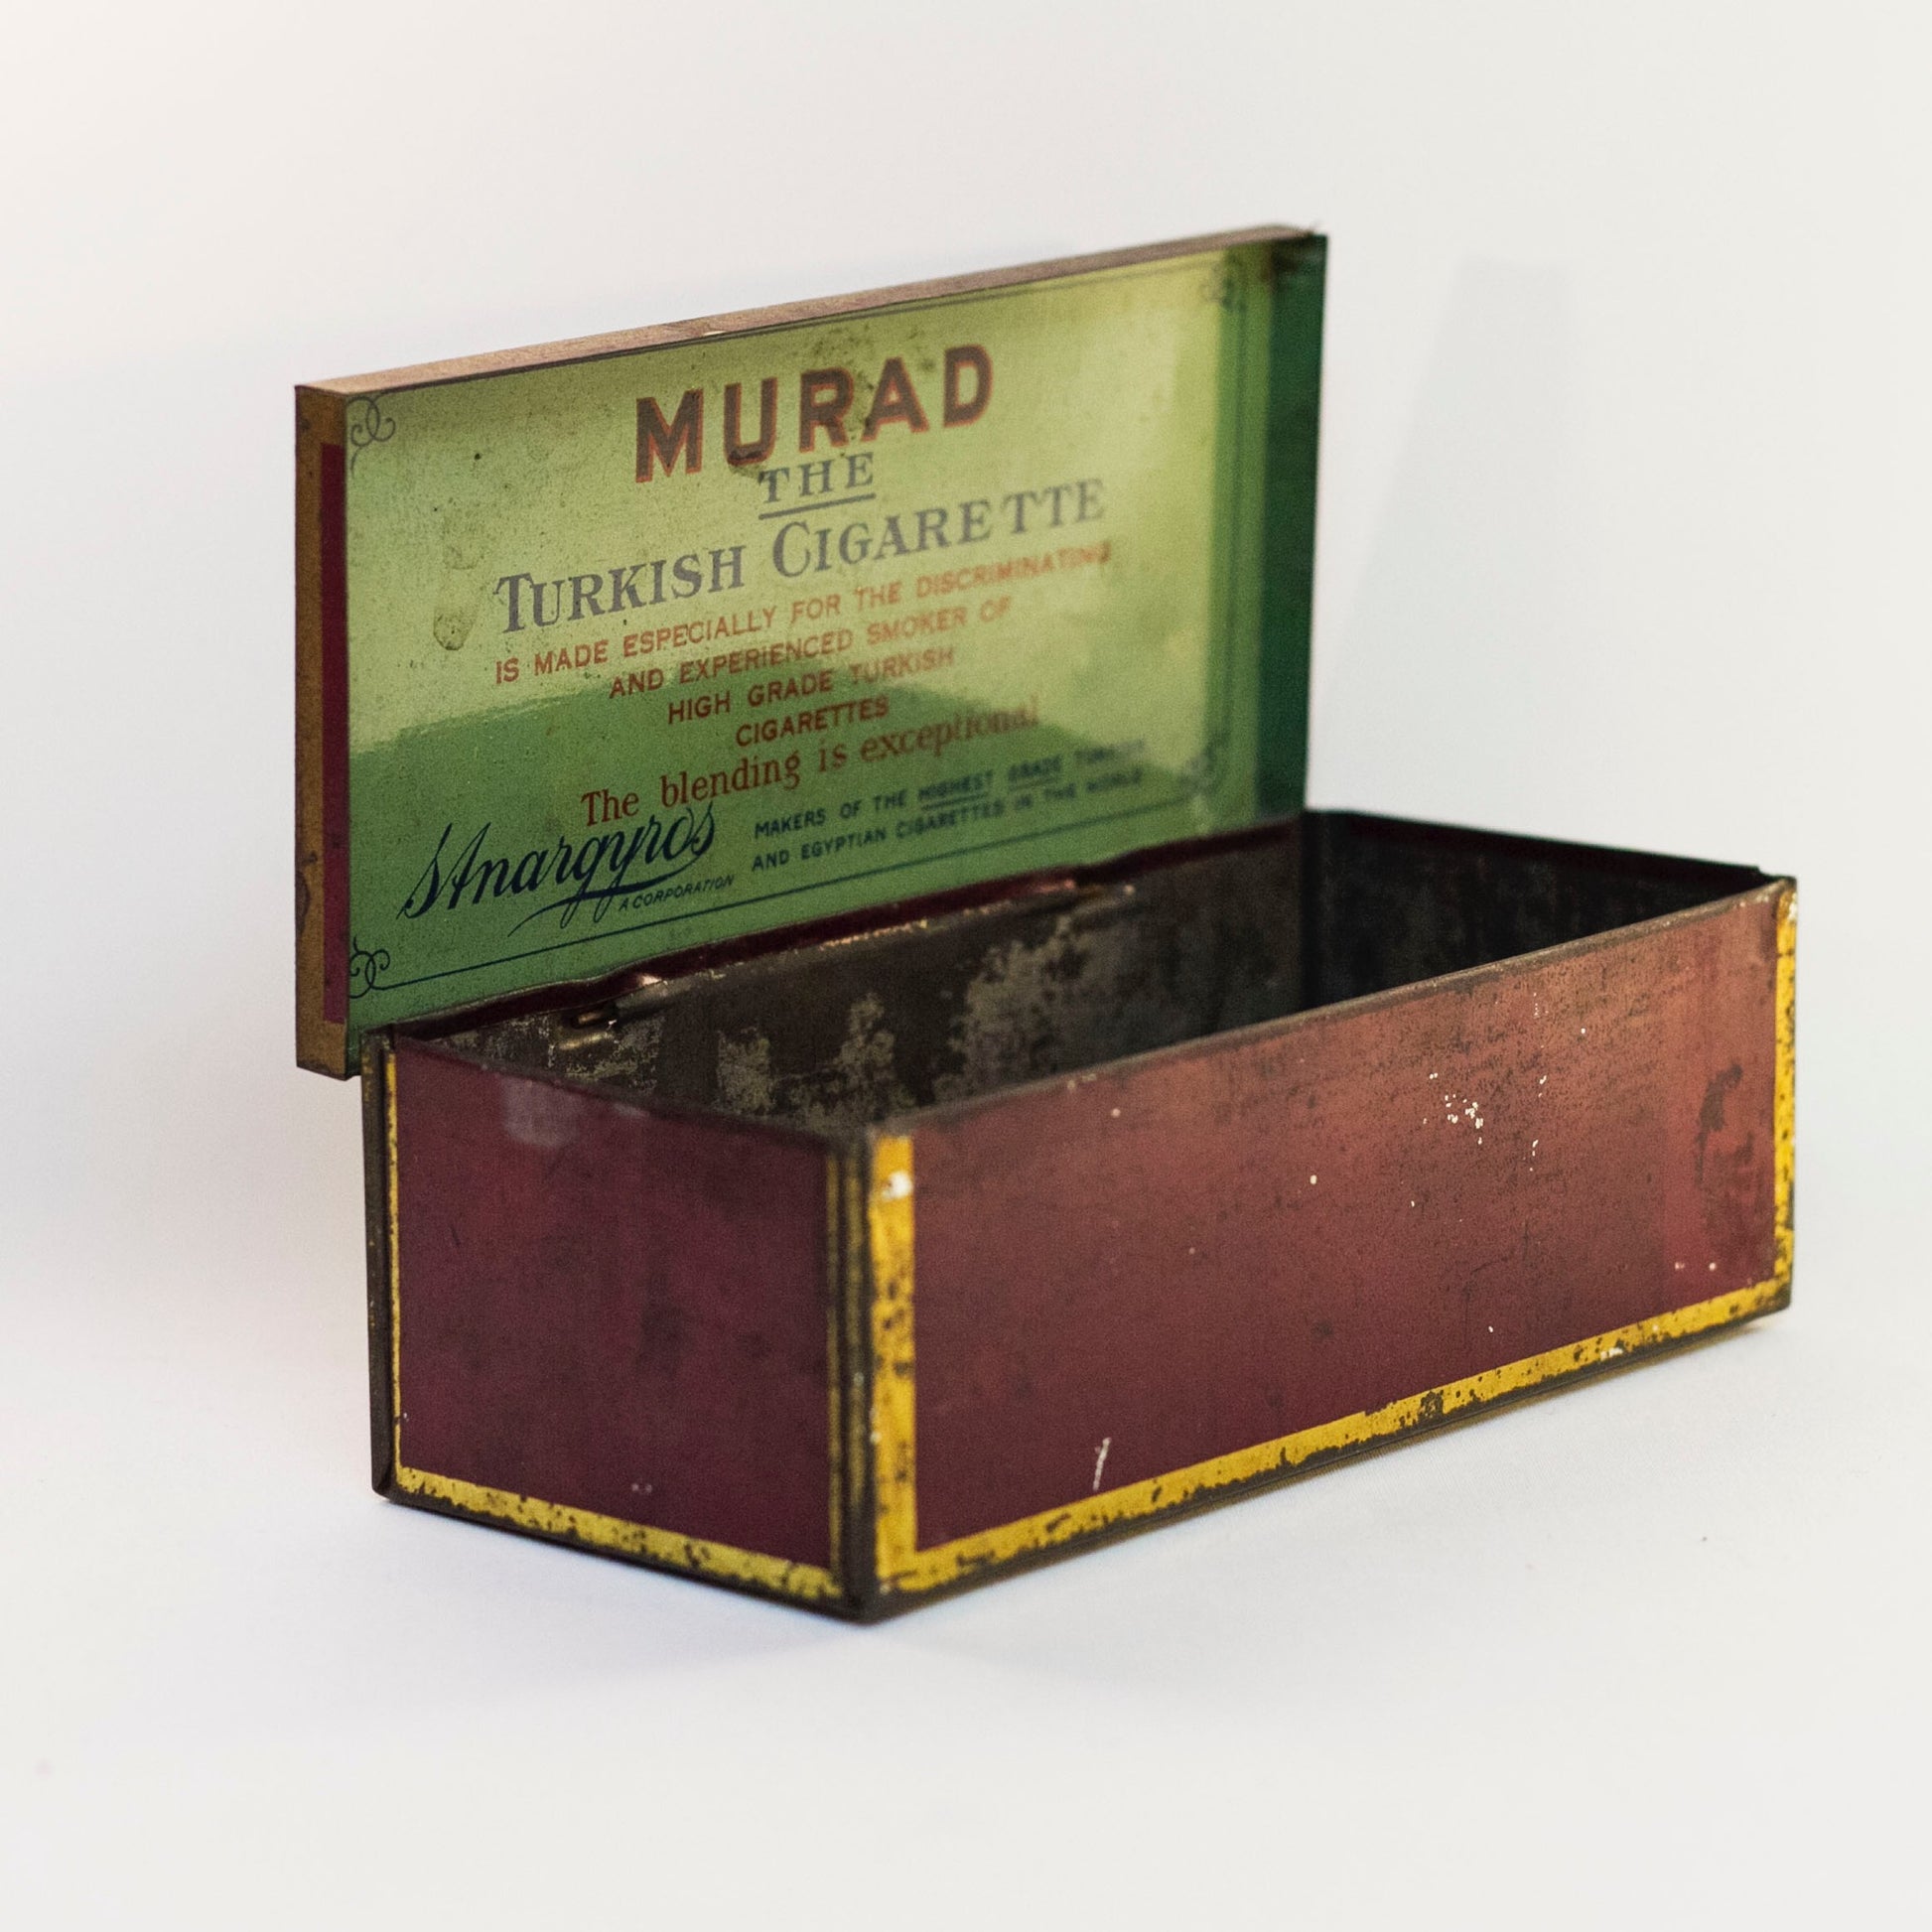 MURAD THE TURKISH CIGARETTE TIN Early Orientalist Themed Lithograph Produced by S. Anargyros Circa Early 1900s